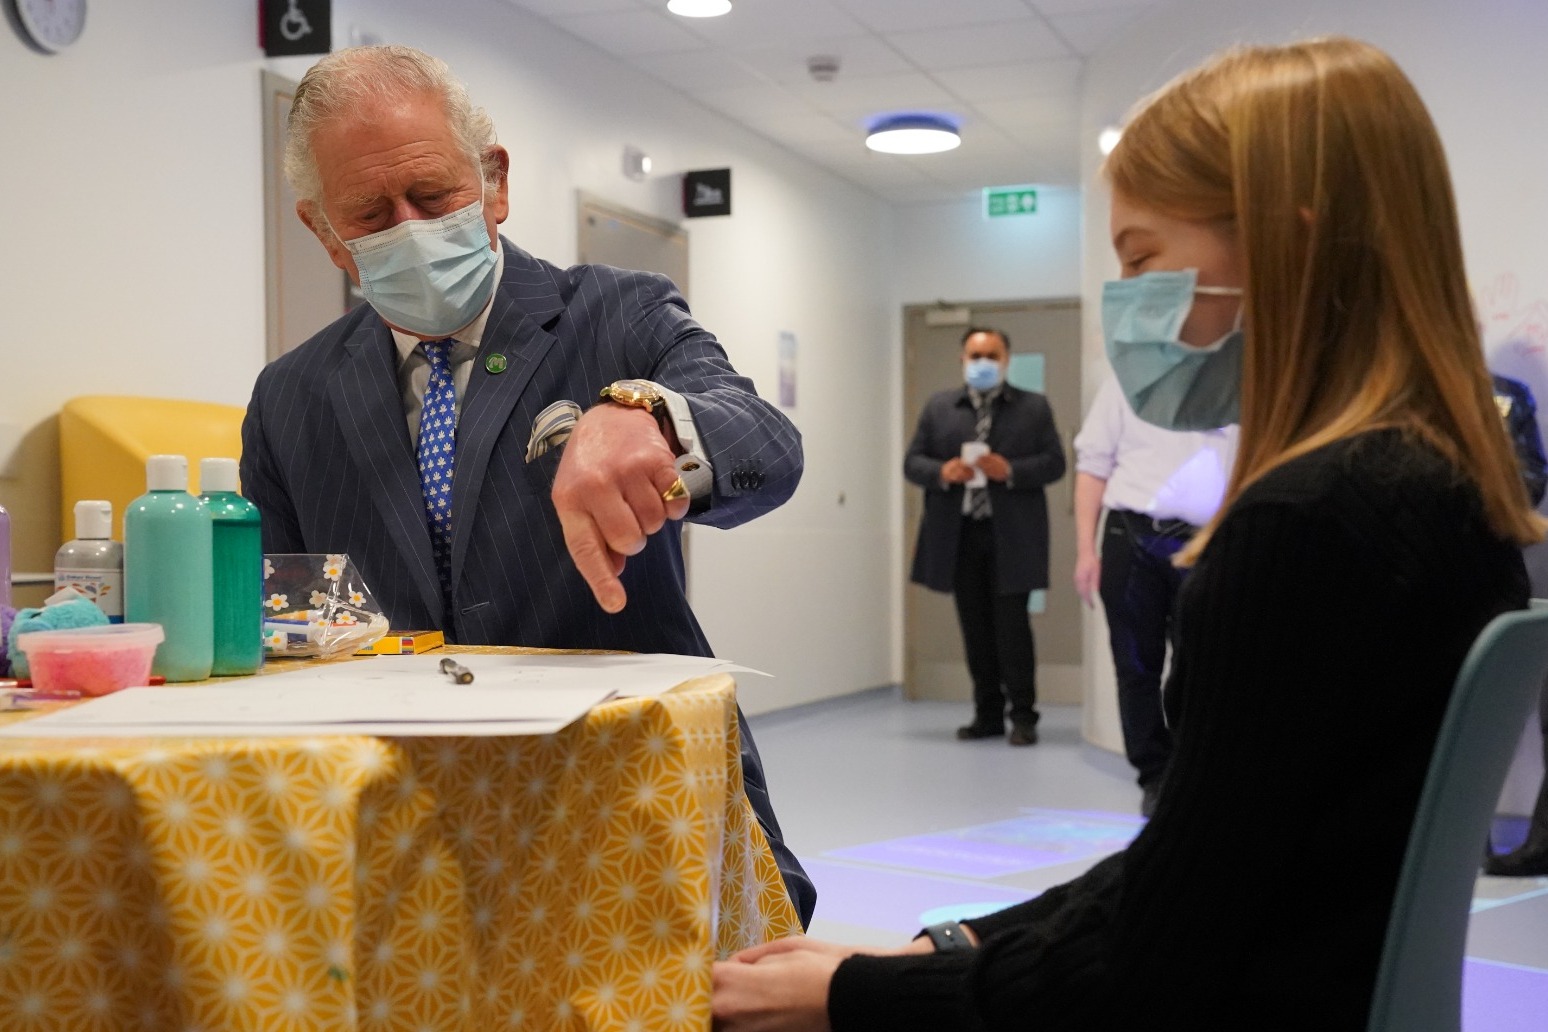 Charles praises NHS as he opens £380m cancer treatment centre 